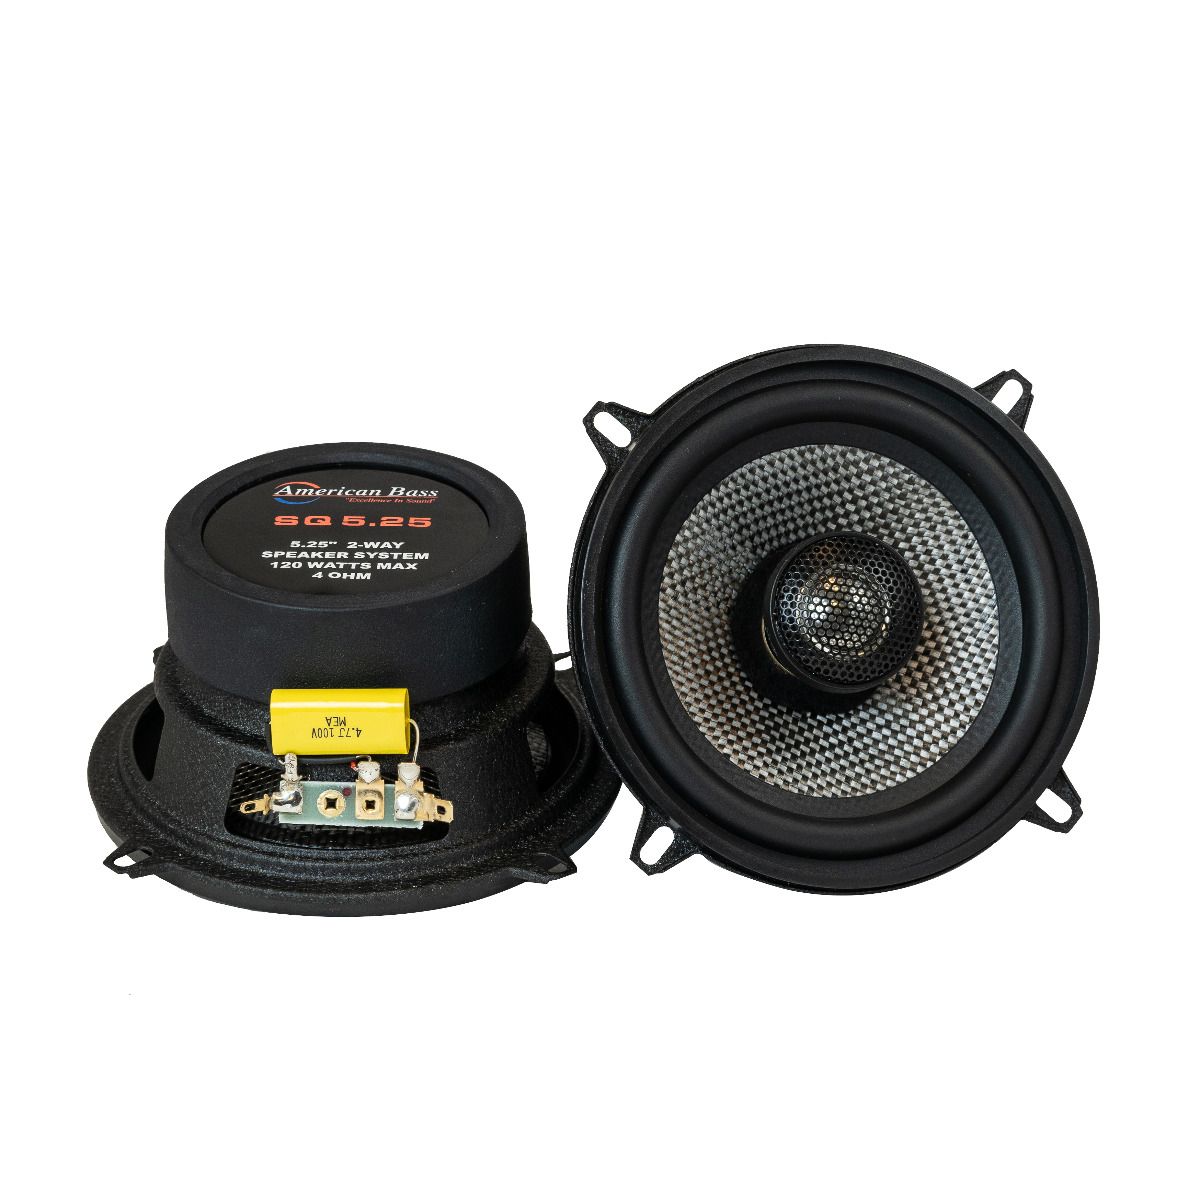 American Bass SQ5.25 5.25" 2-Way Coaxial Car Speakers 60 Watts 4-Ohm (Pair)